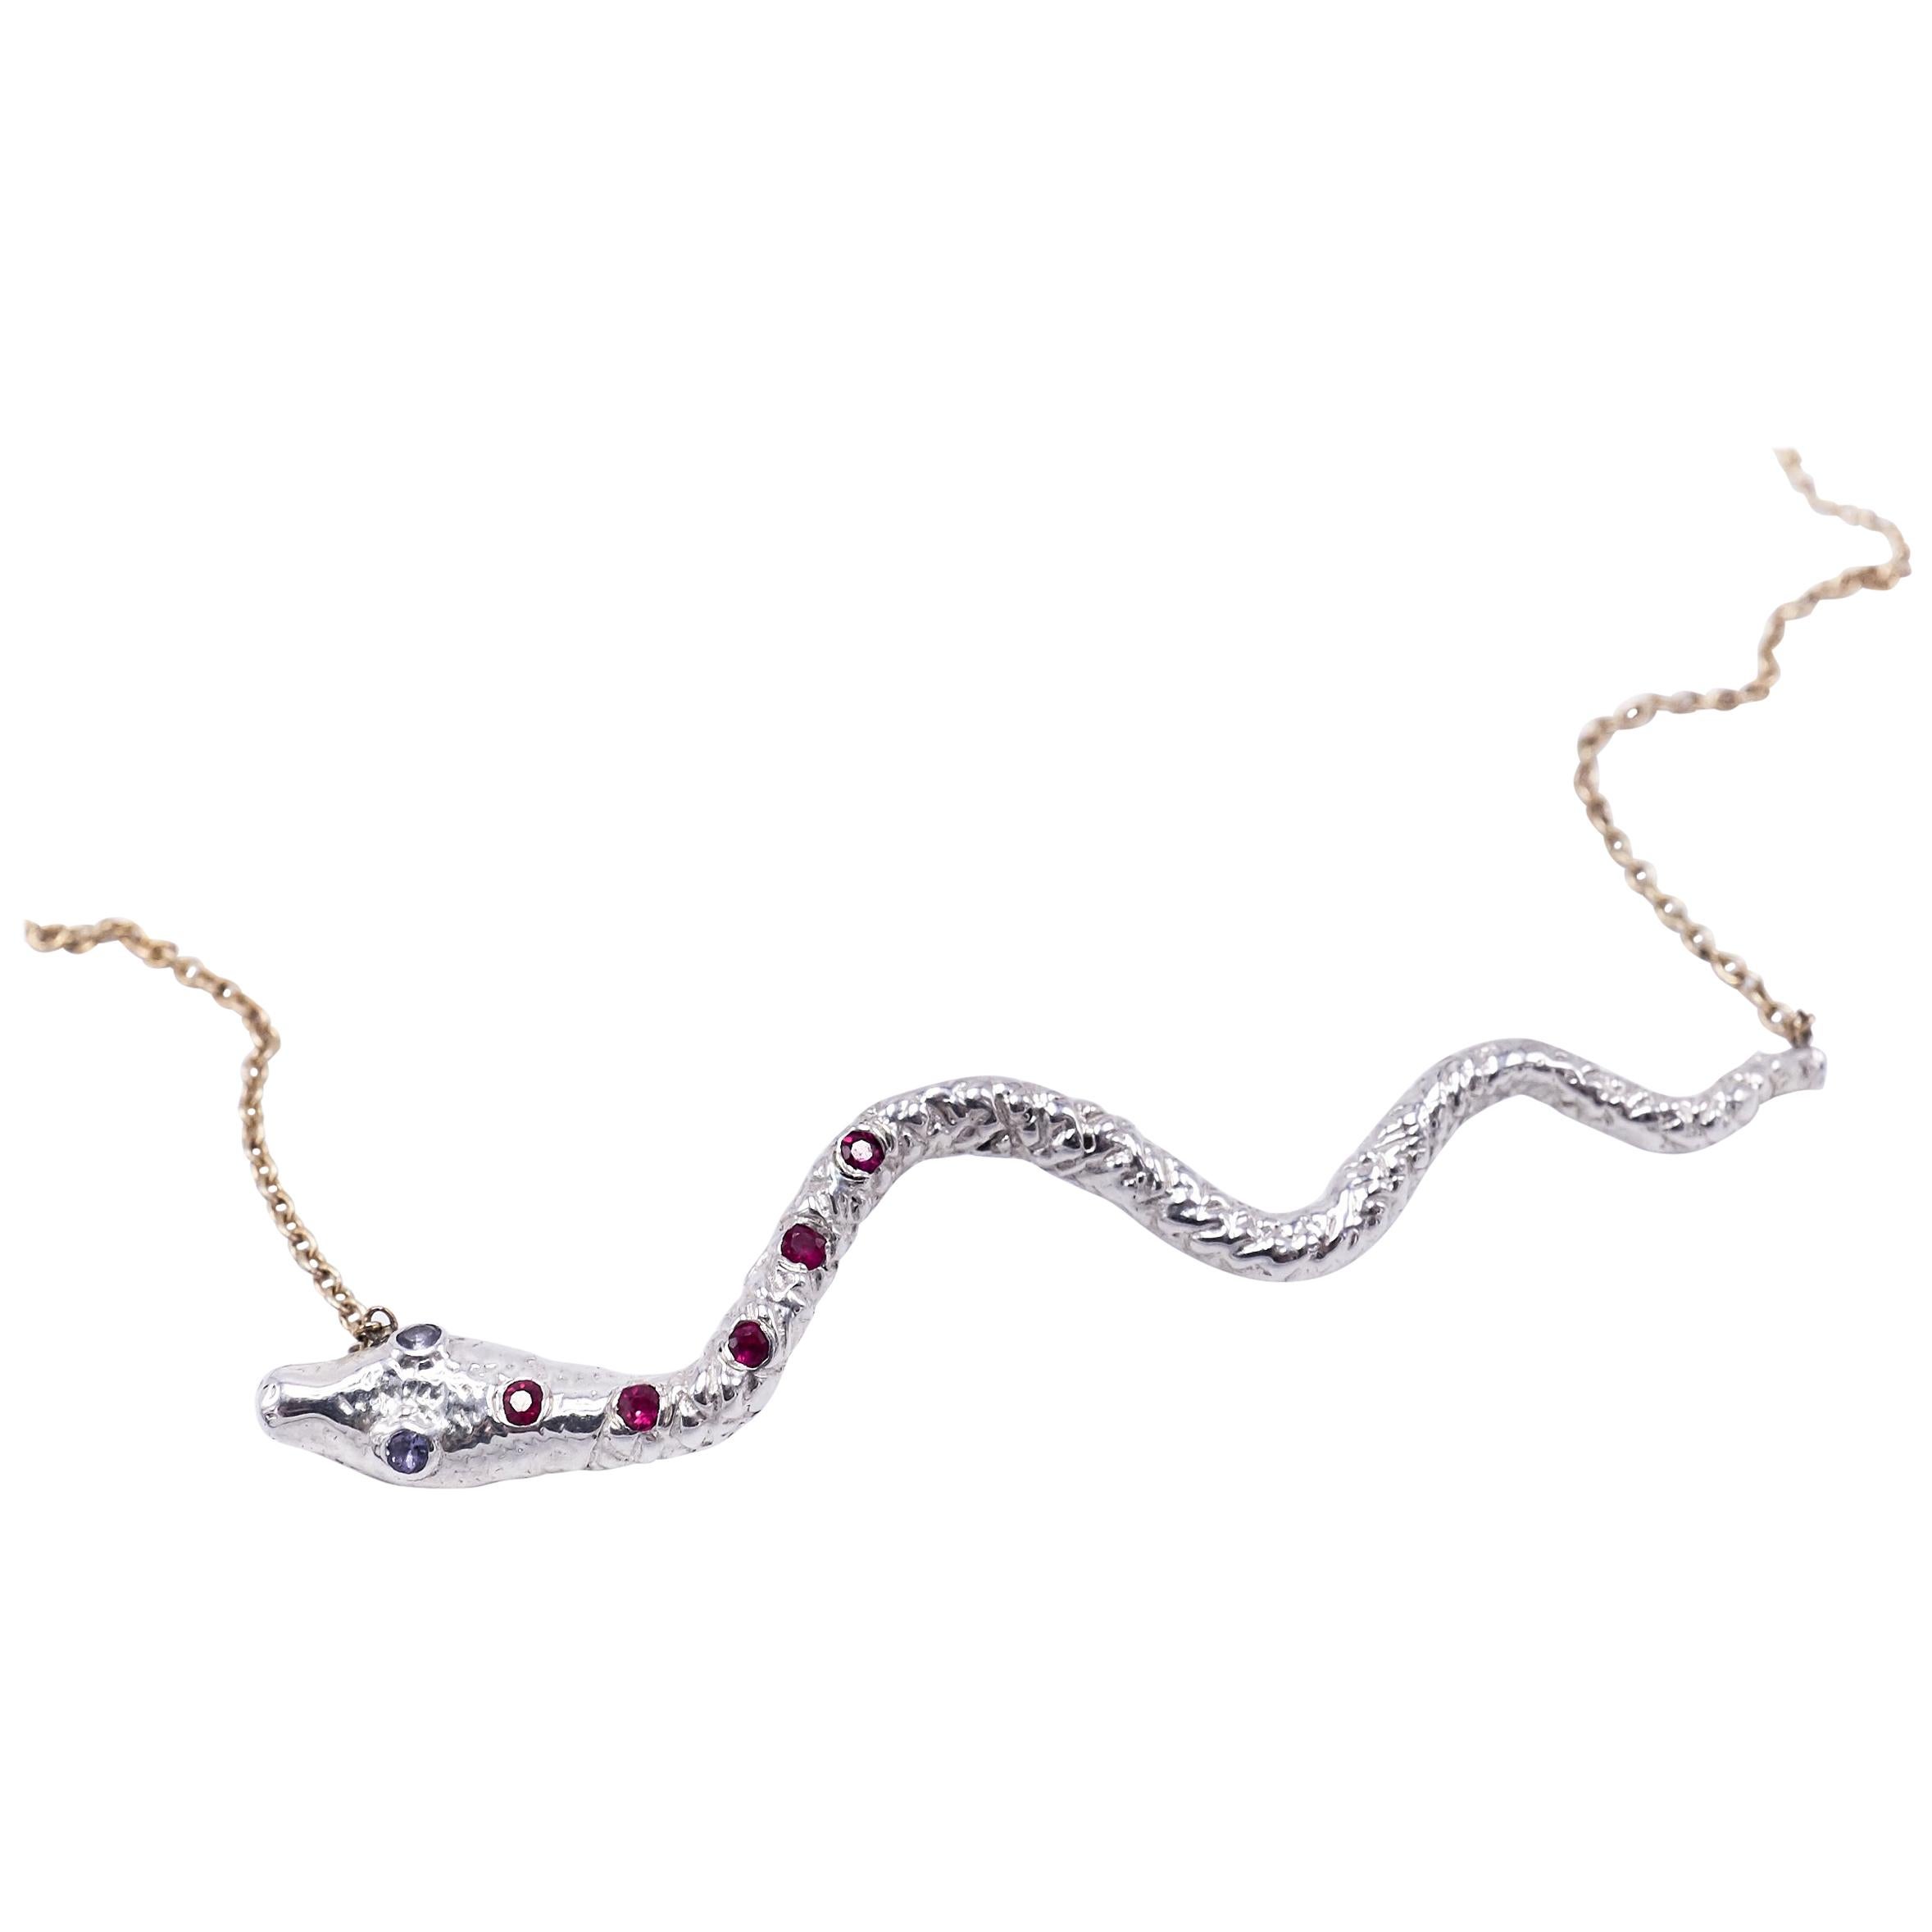 Ruby Iolite Snake  Necklace Silver Gold Filled Chain J Dauphin